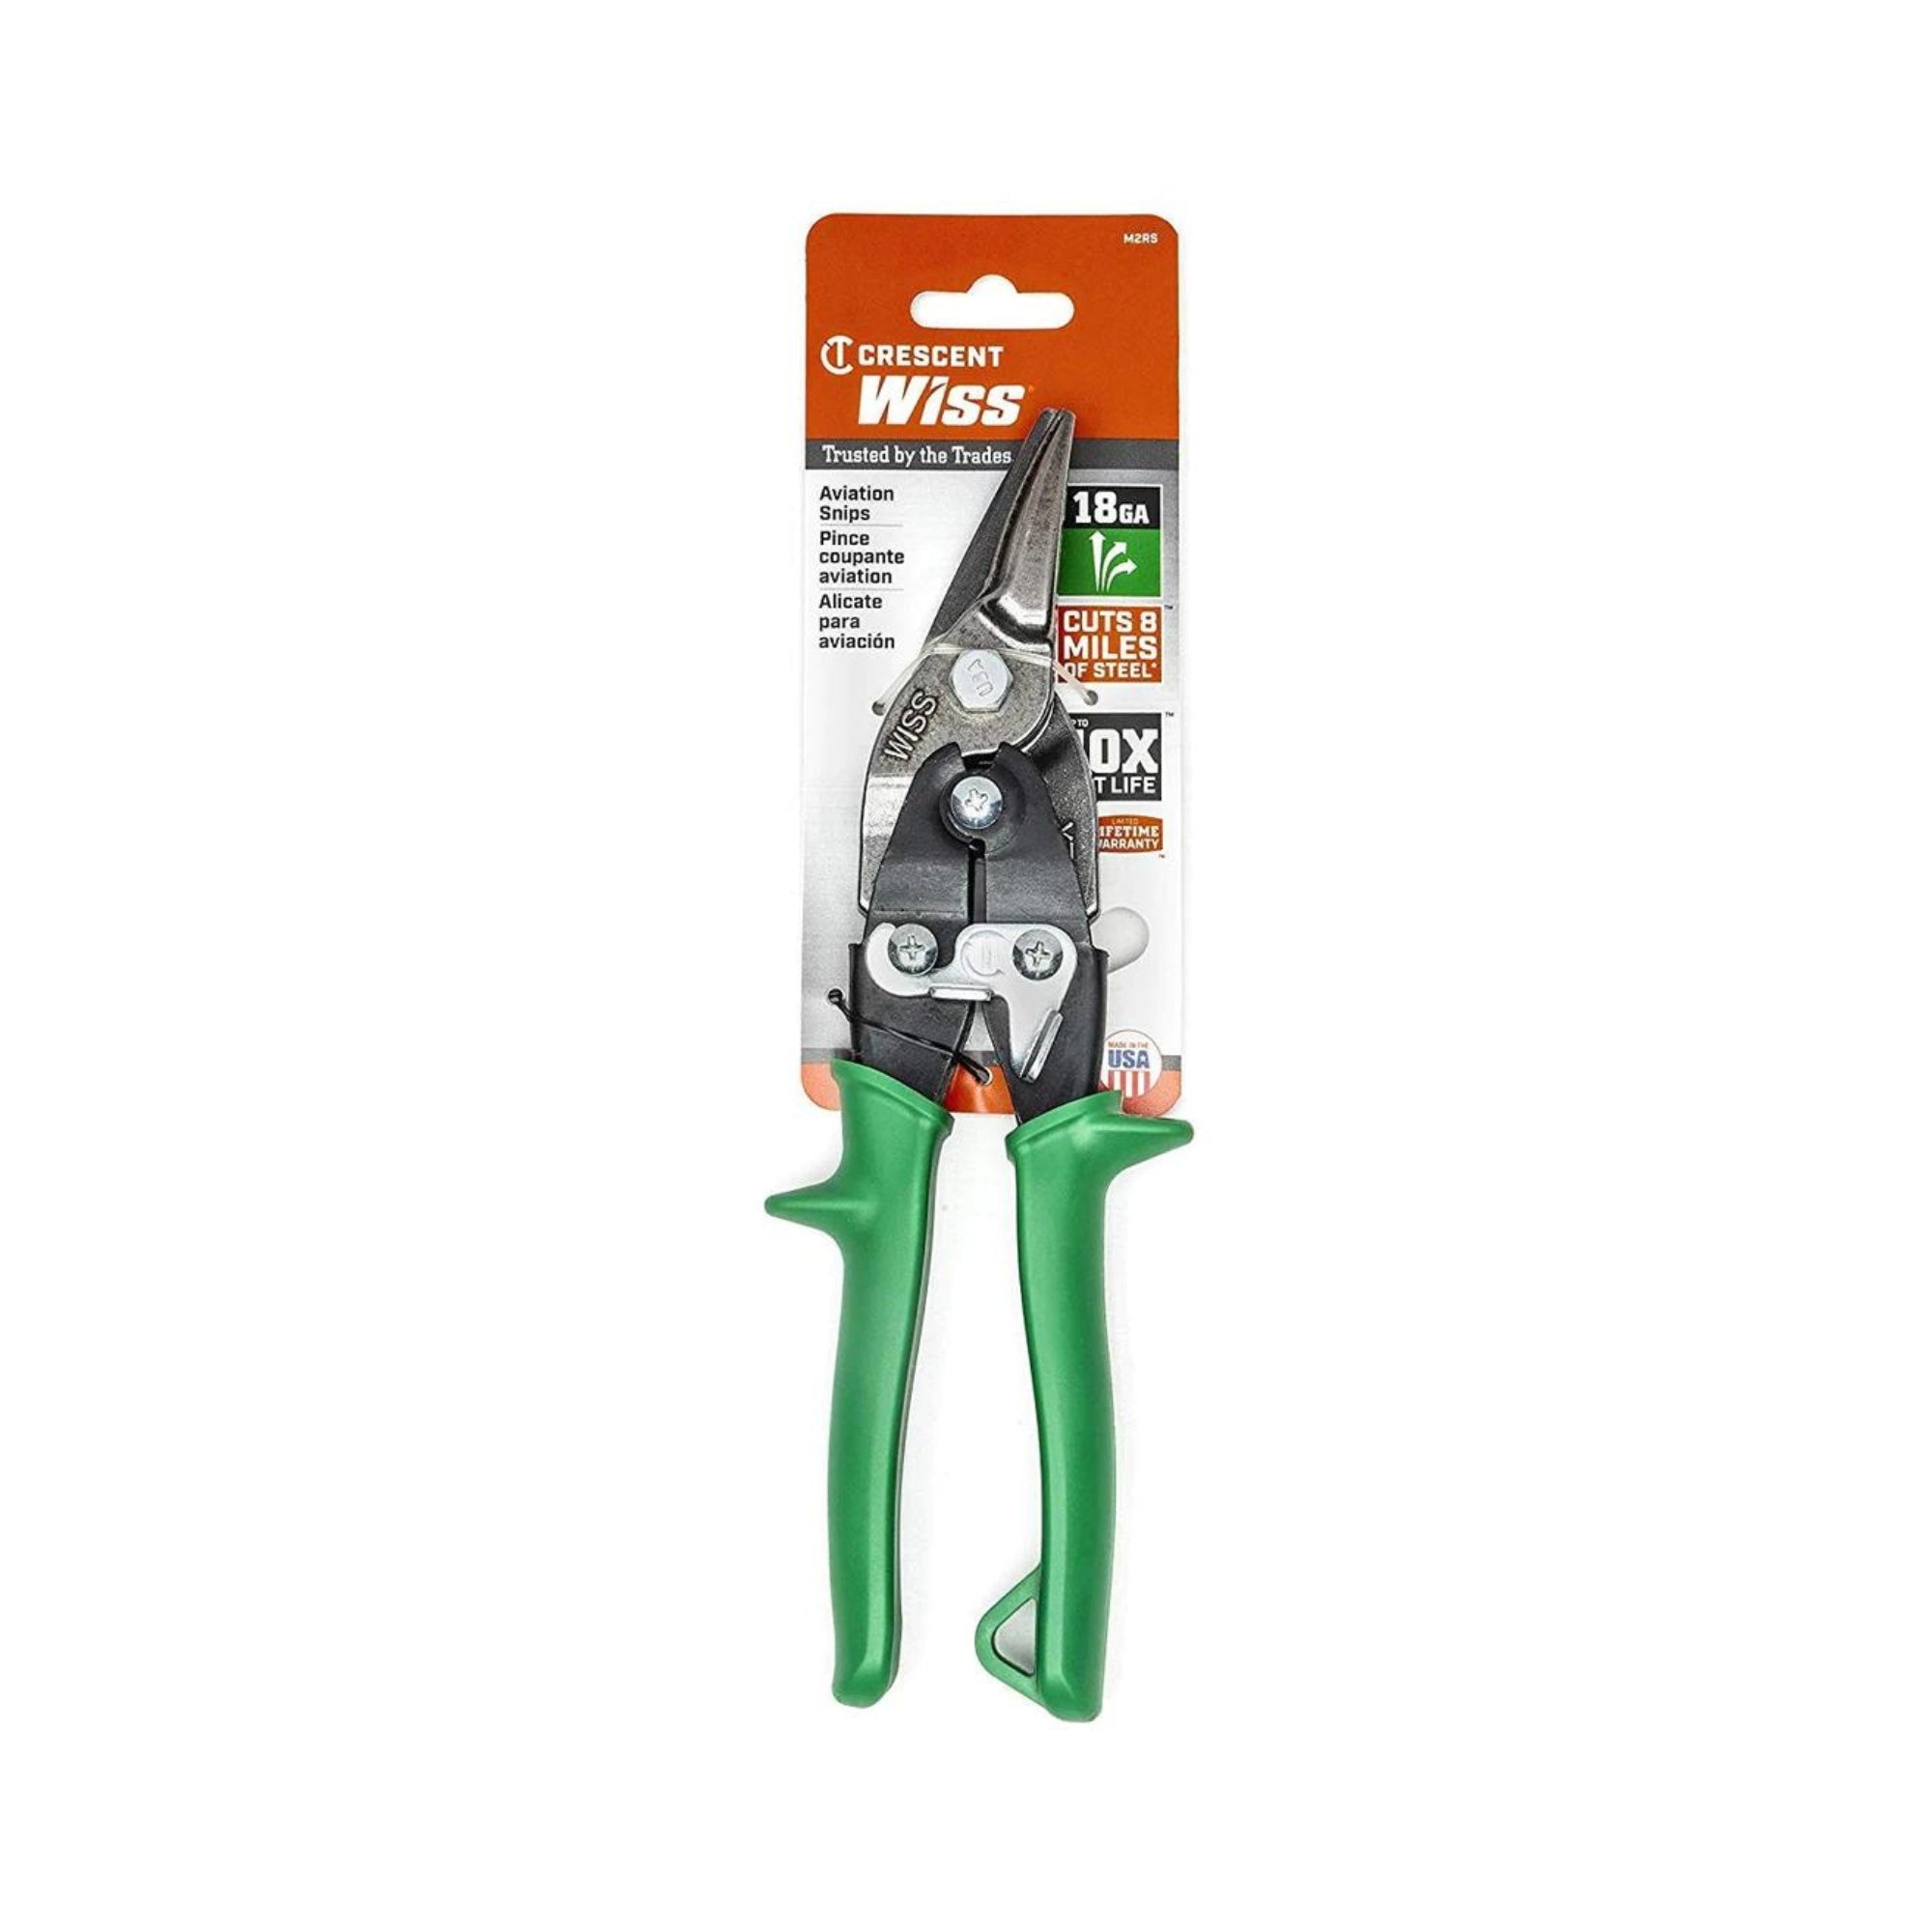 Crescent Wiss® 9-3/4" MetalMaster® Compound Action Snips - right cut - M2R